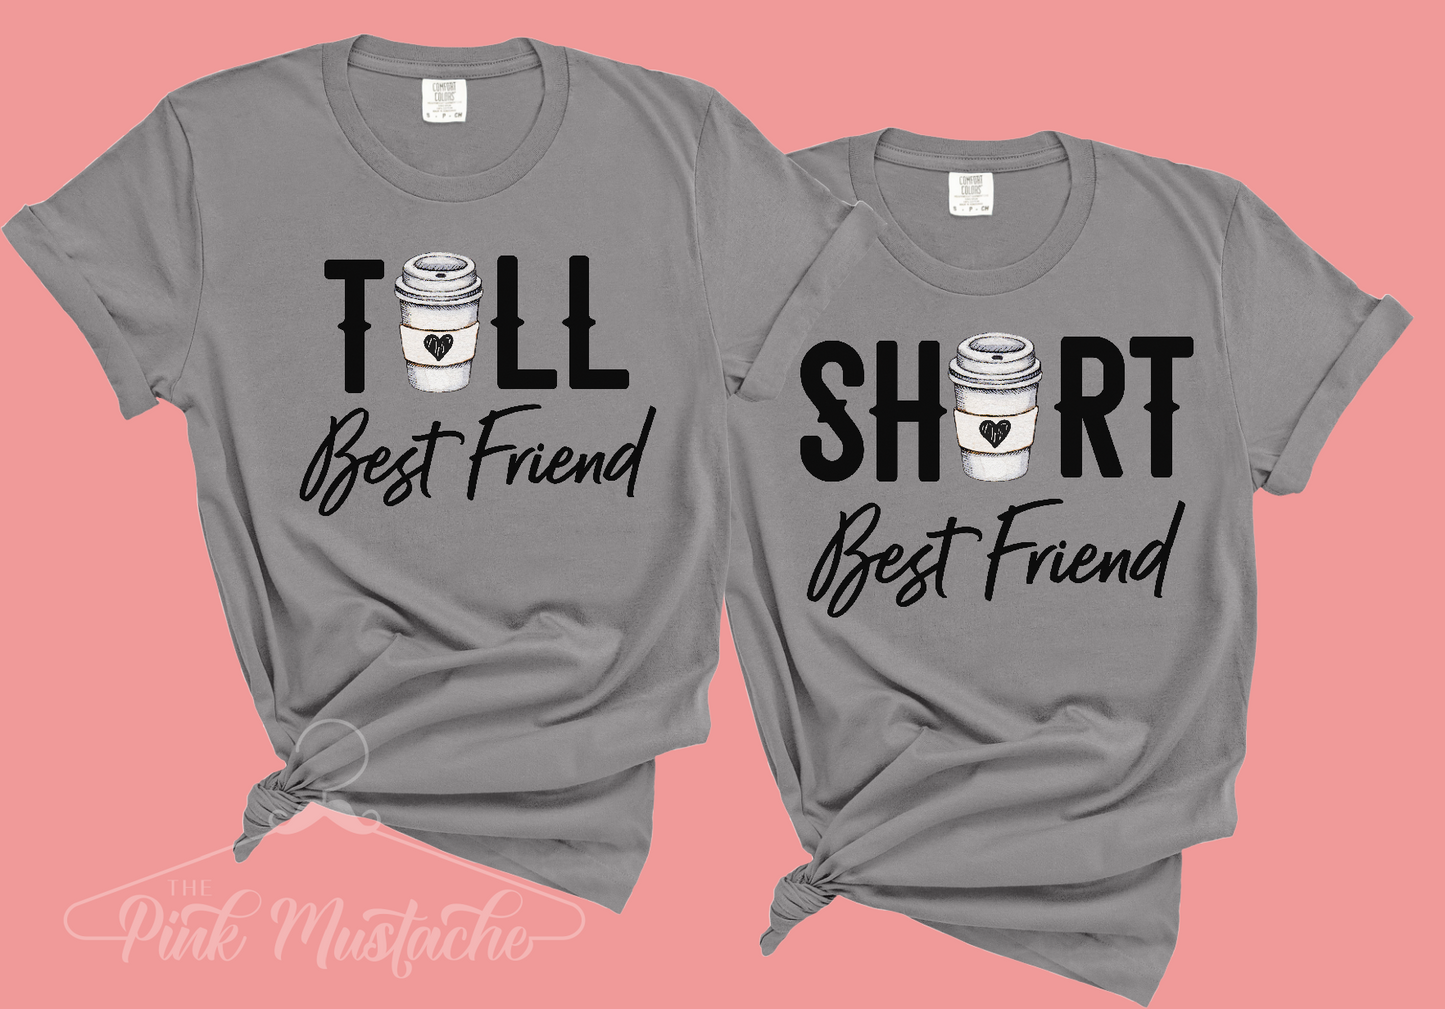 Comfort Colors  Best Friend Shirts - Tall and Short Best Friend / Coffee Themed / Funny BFF shirts